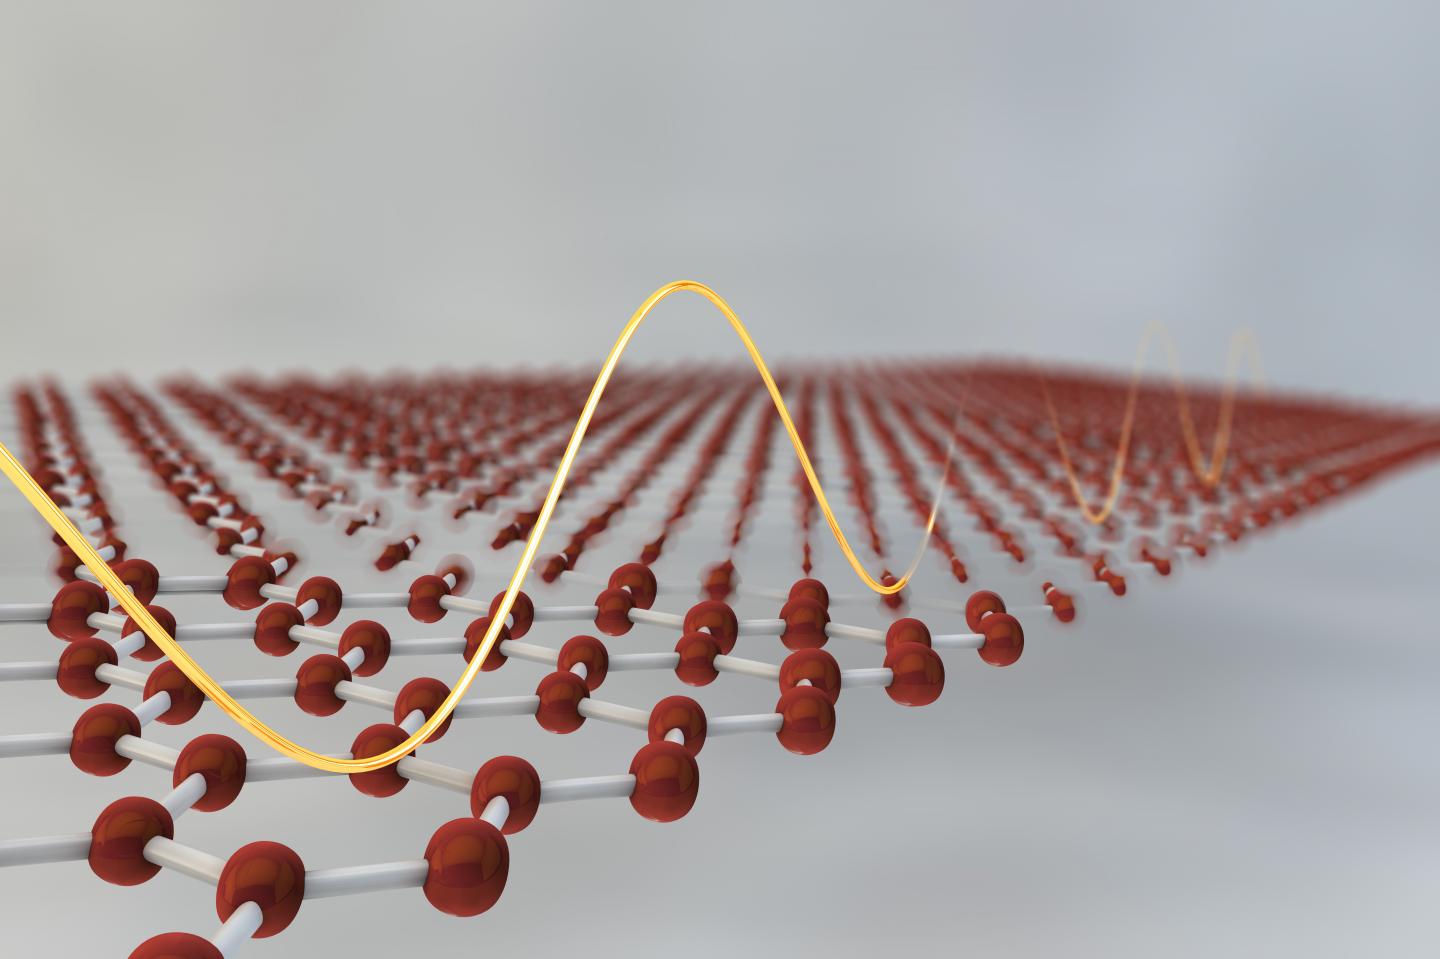 Graphene-Based Absorbers Could Enable Ultrafast Lasers in THz Range